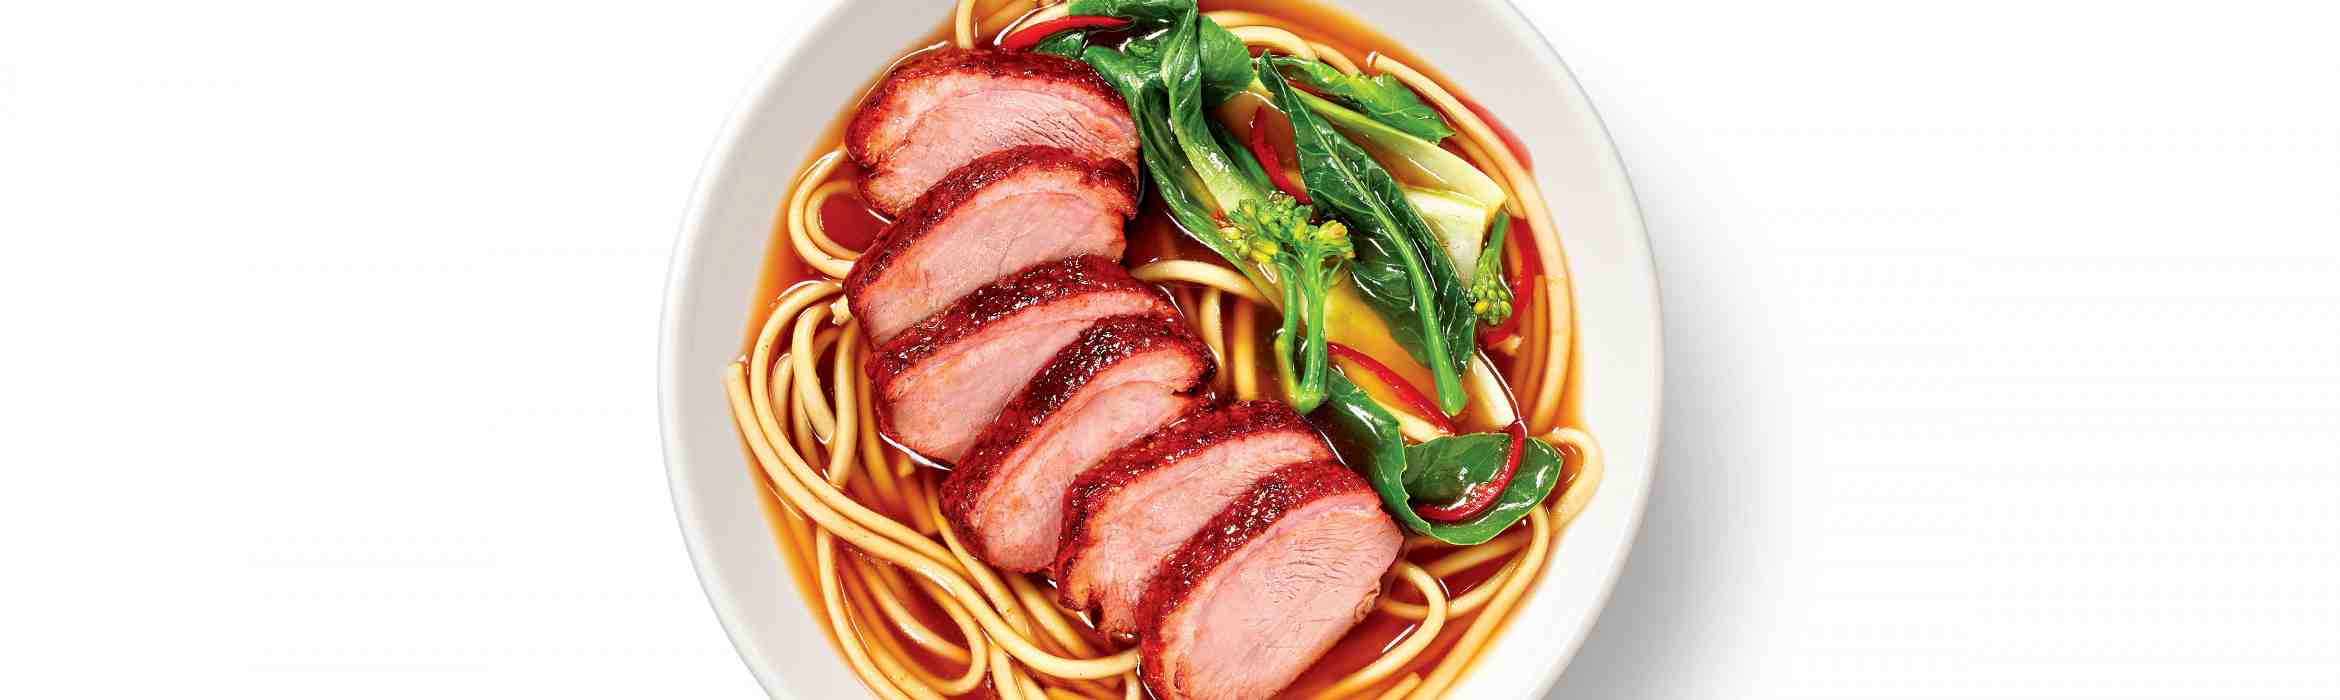 Peking Duck Breast with Broth, Soba Noodle and Greens Recipe